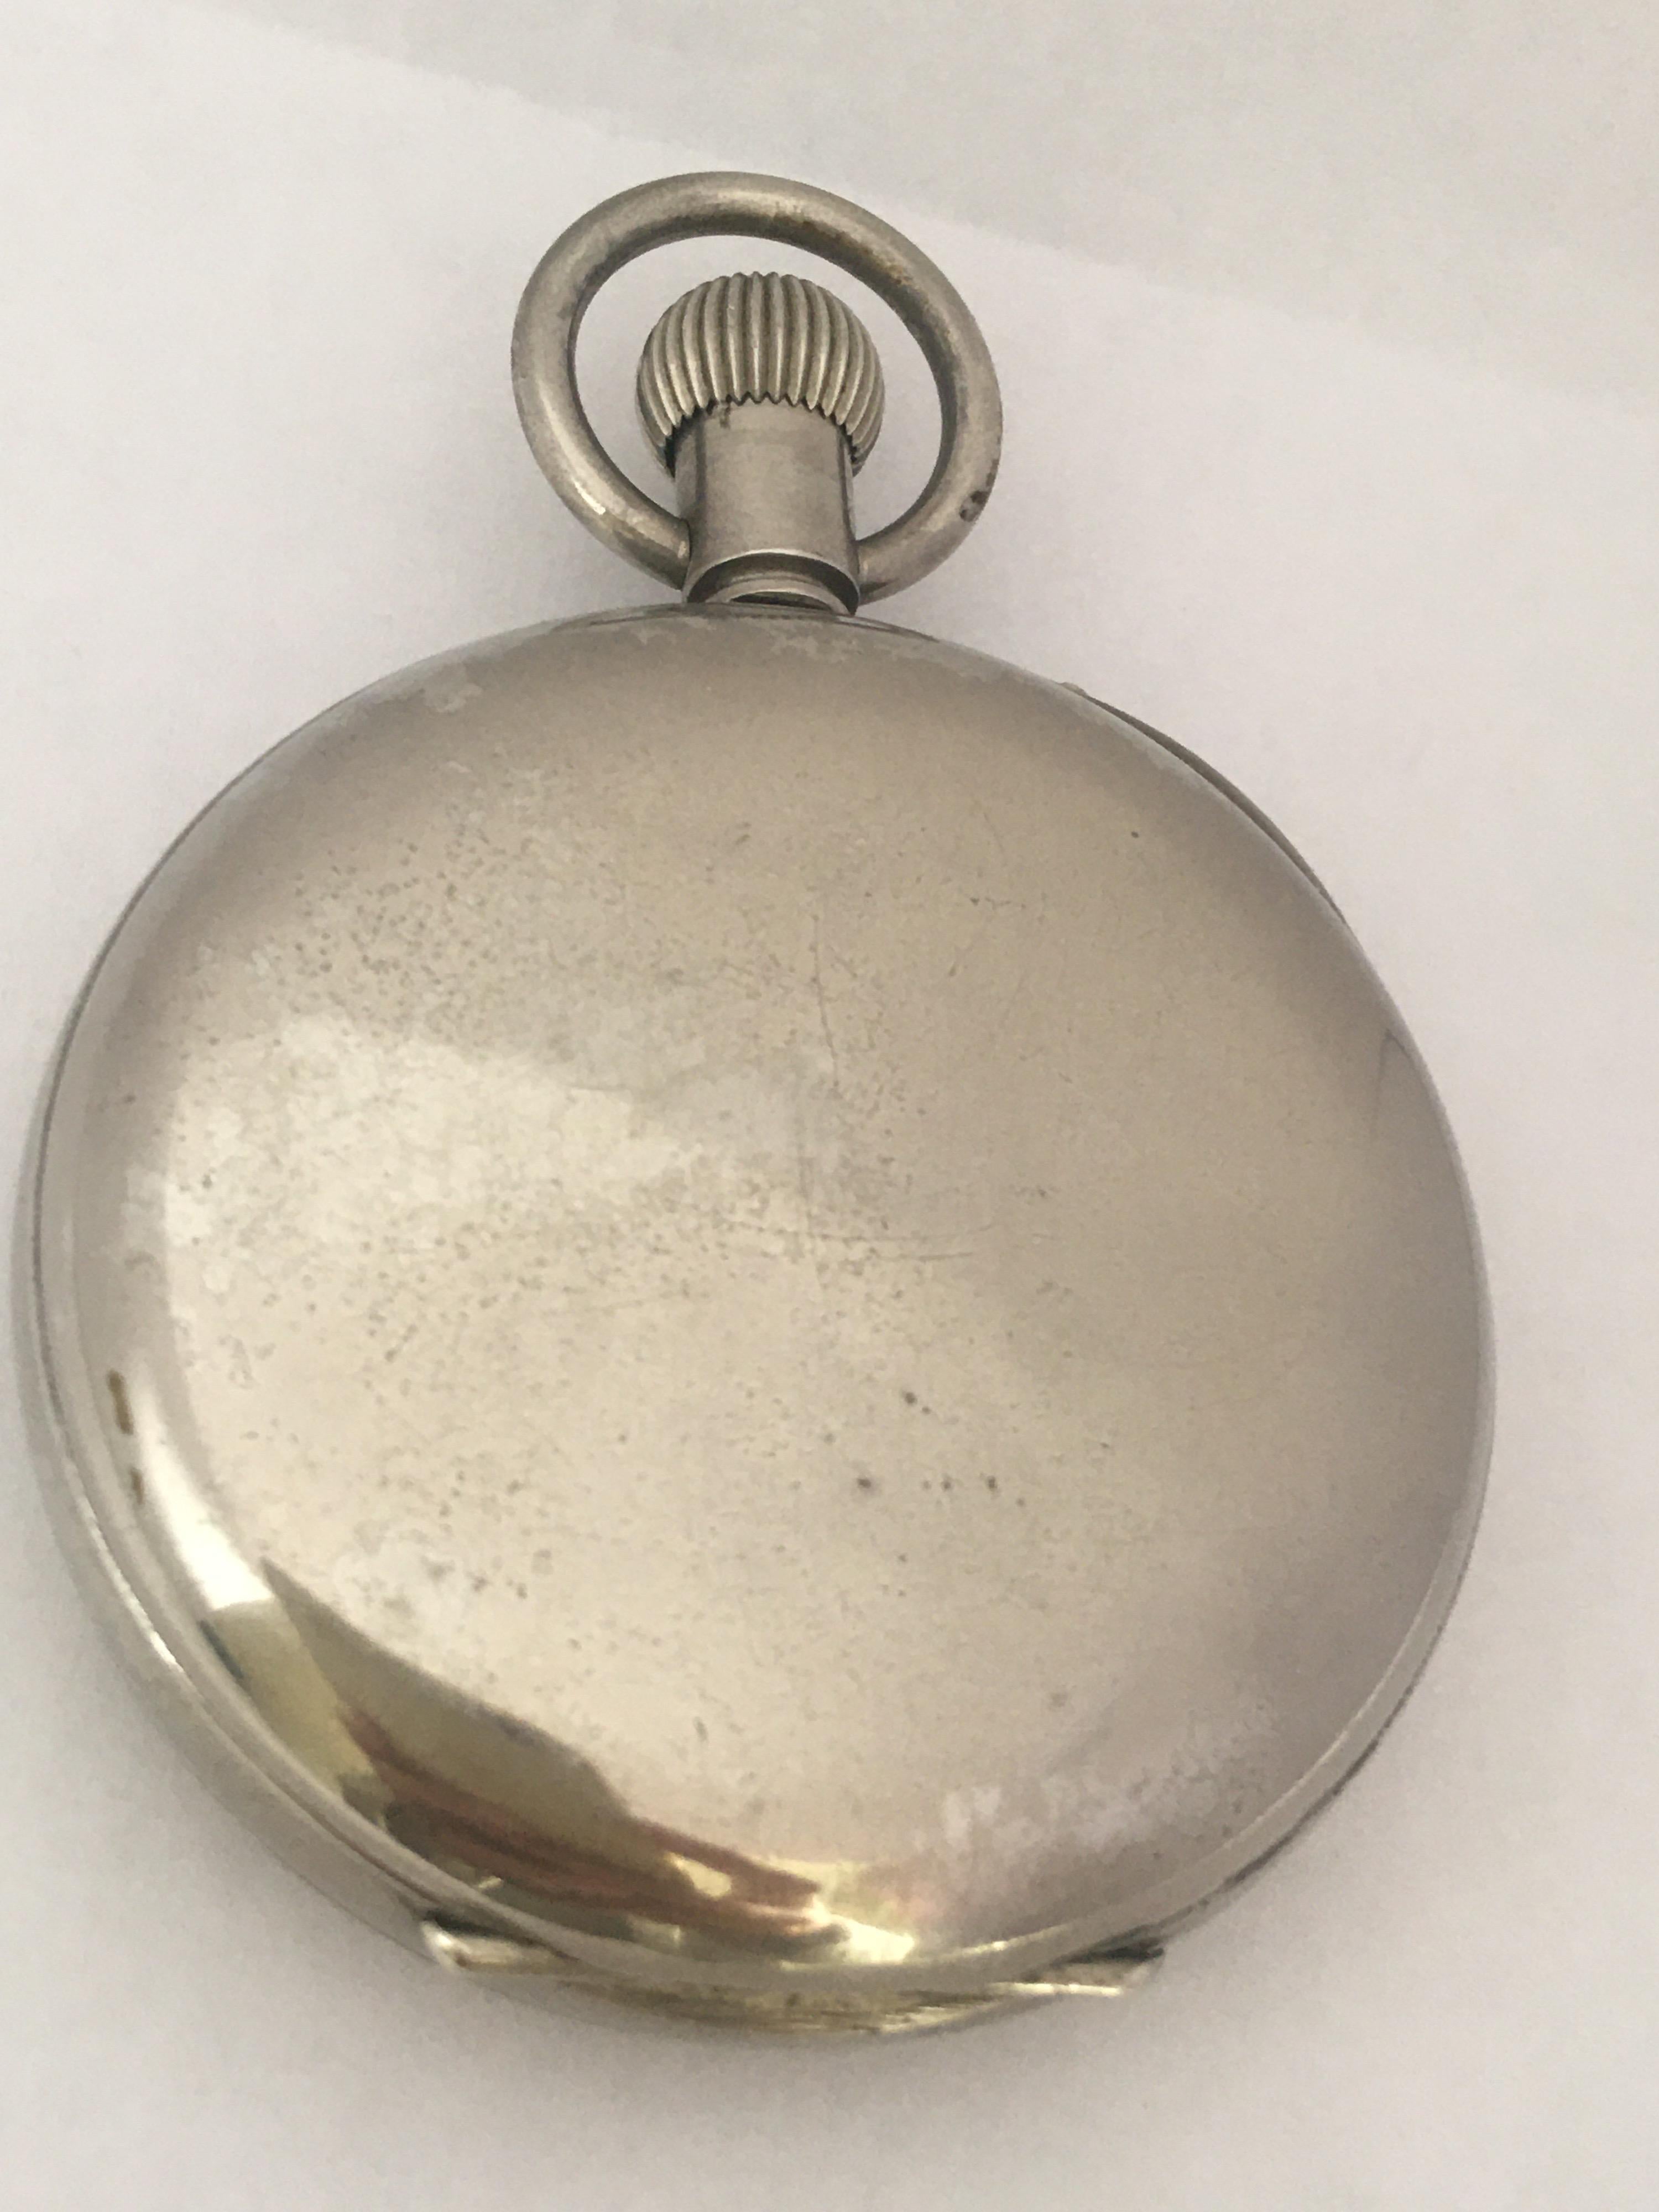 This beautiful heavy 59mm case diameter antique hand winding 8 day pocket watch is in good working condition and it is running well (it keeps a good time). Visible signs of ageing and wear with small light marks and tarnishes on the watch case